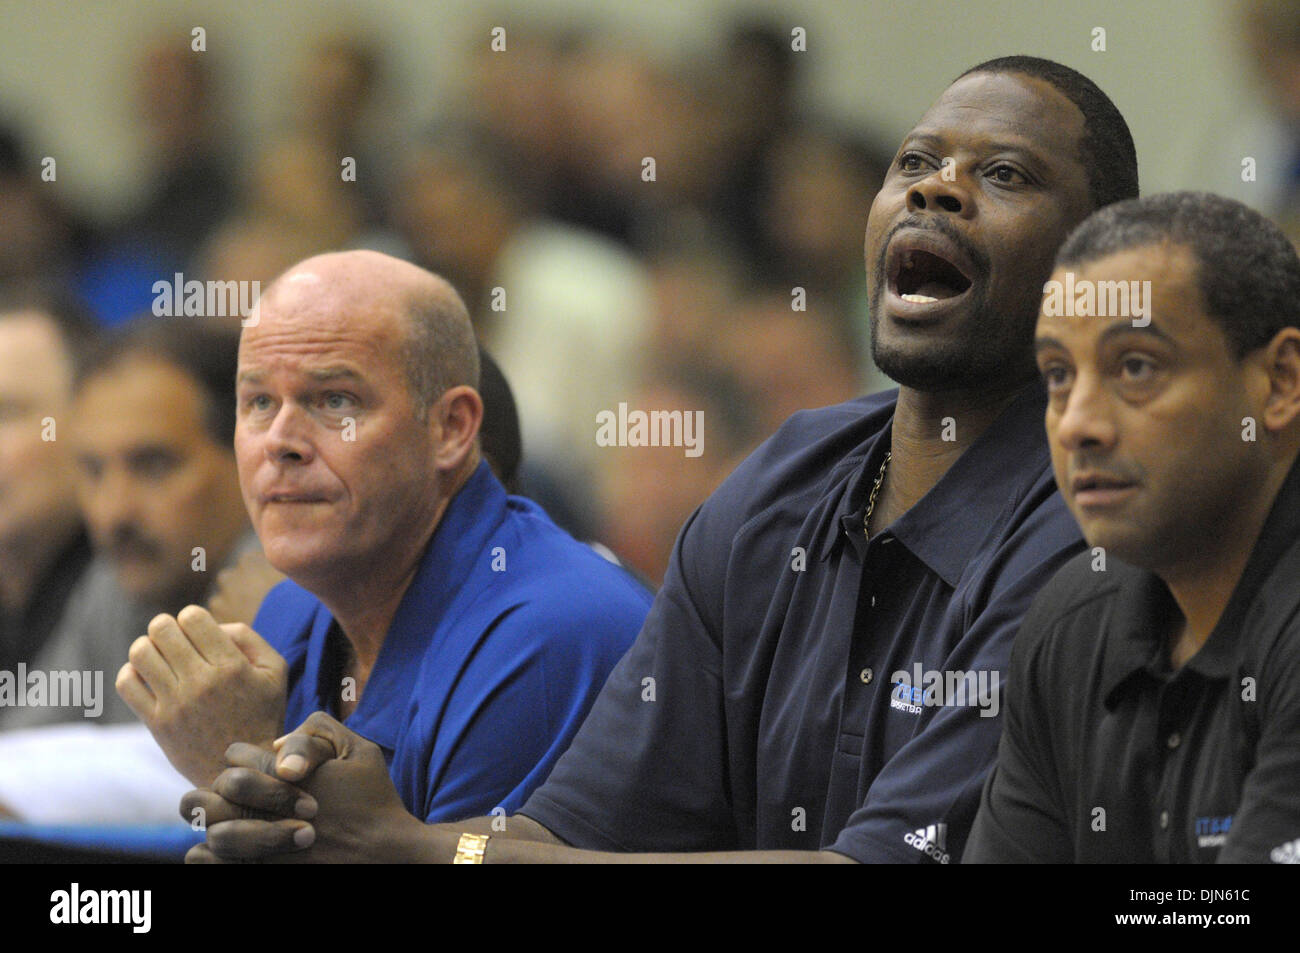 Jul 09, 2008 - Orlando, Florida, USA - Orlando Magic assistant head coach, and retired Hall of Fame basketball player, PATRICK EWING, second from right, leads their summer league team as acting head coach during a game against the Chicago Bulls summer league team at the RDV Sportsplex in Maitland, Florida, July 9, 2008. (Credit Image: © Phelan Ebanhack/ZUMA Press) Stock Photo